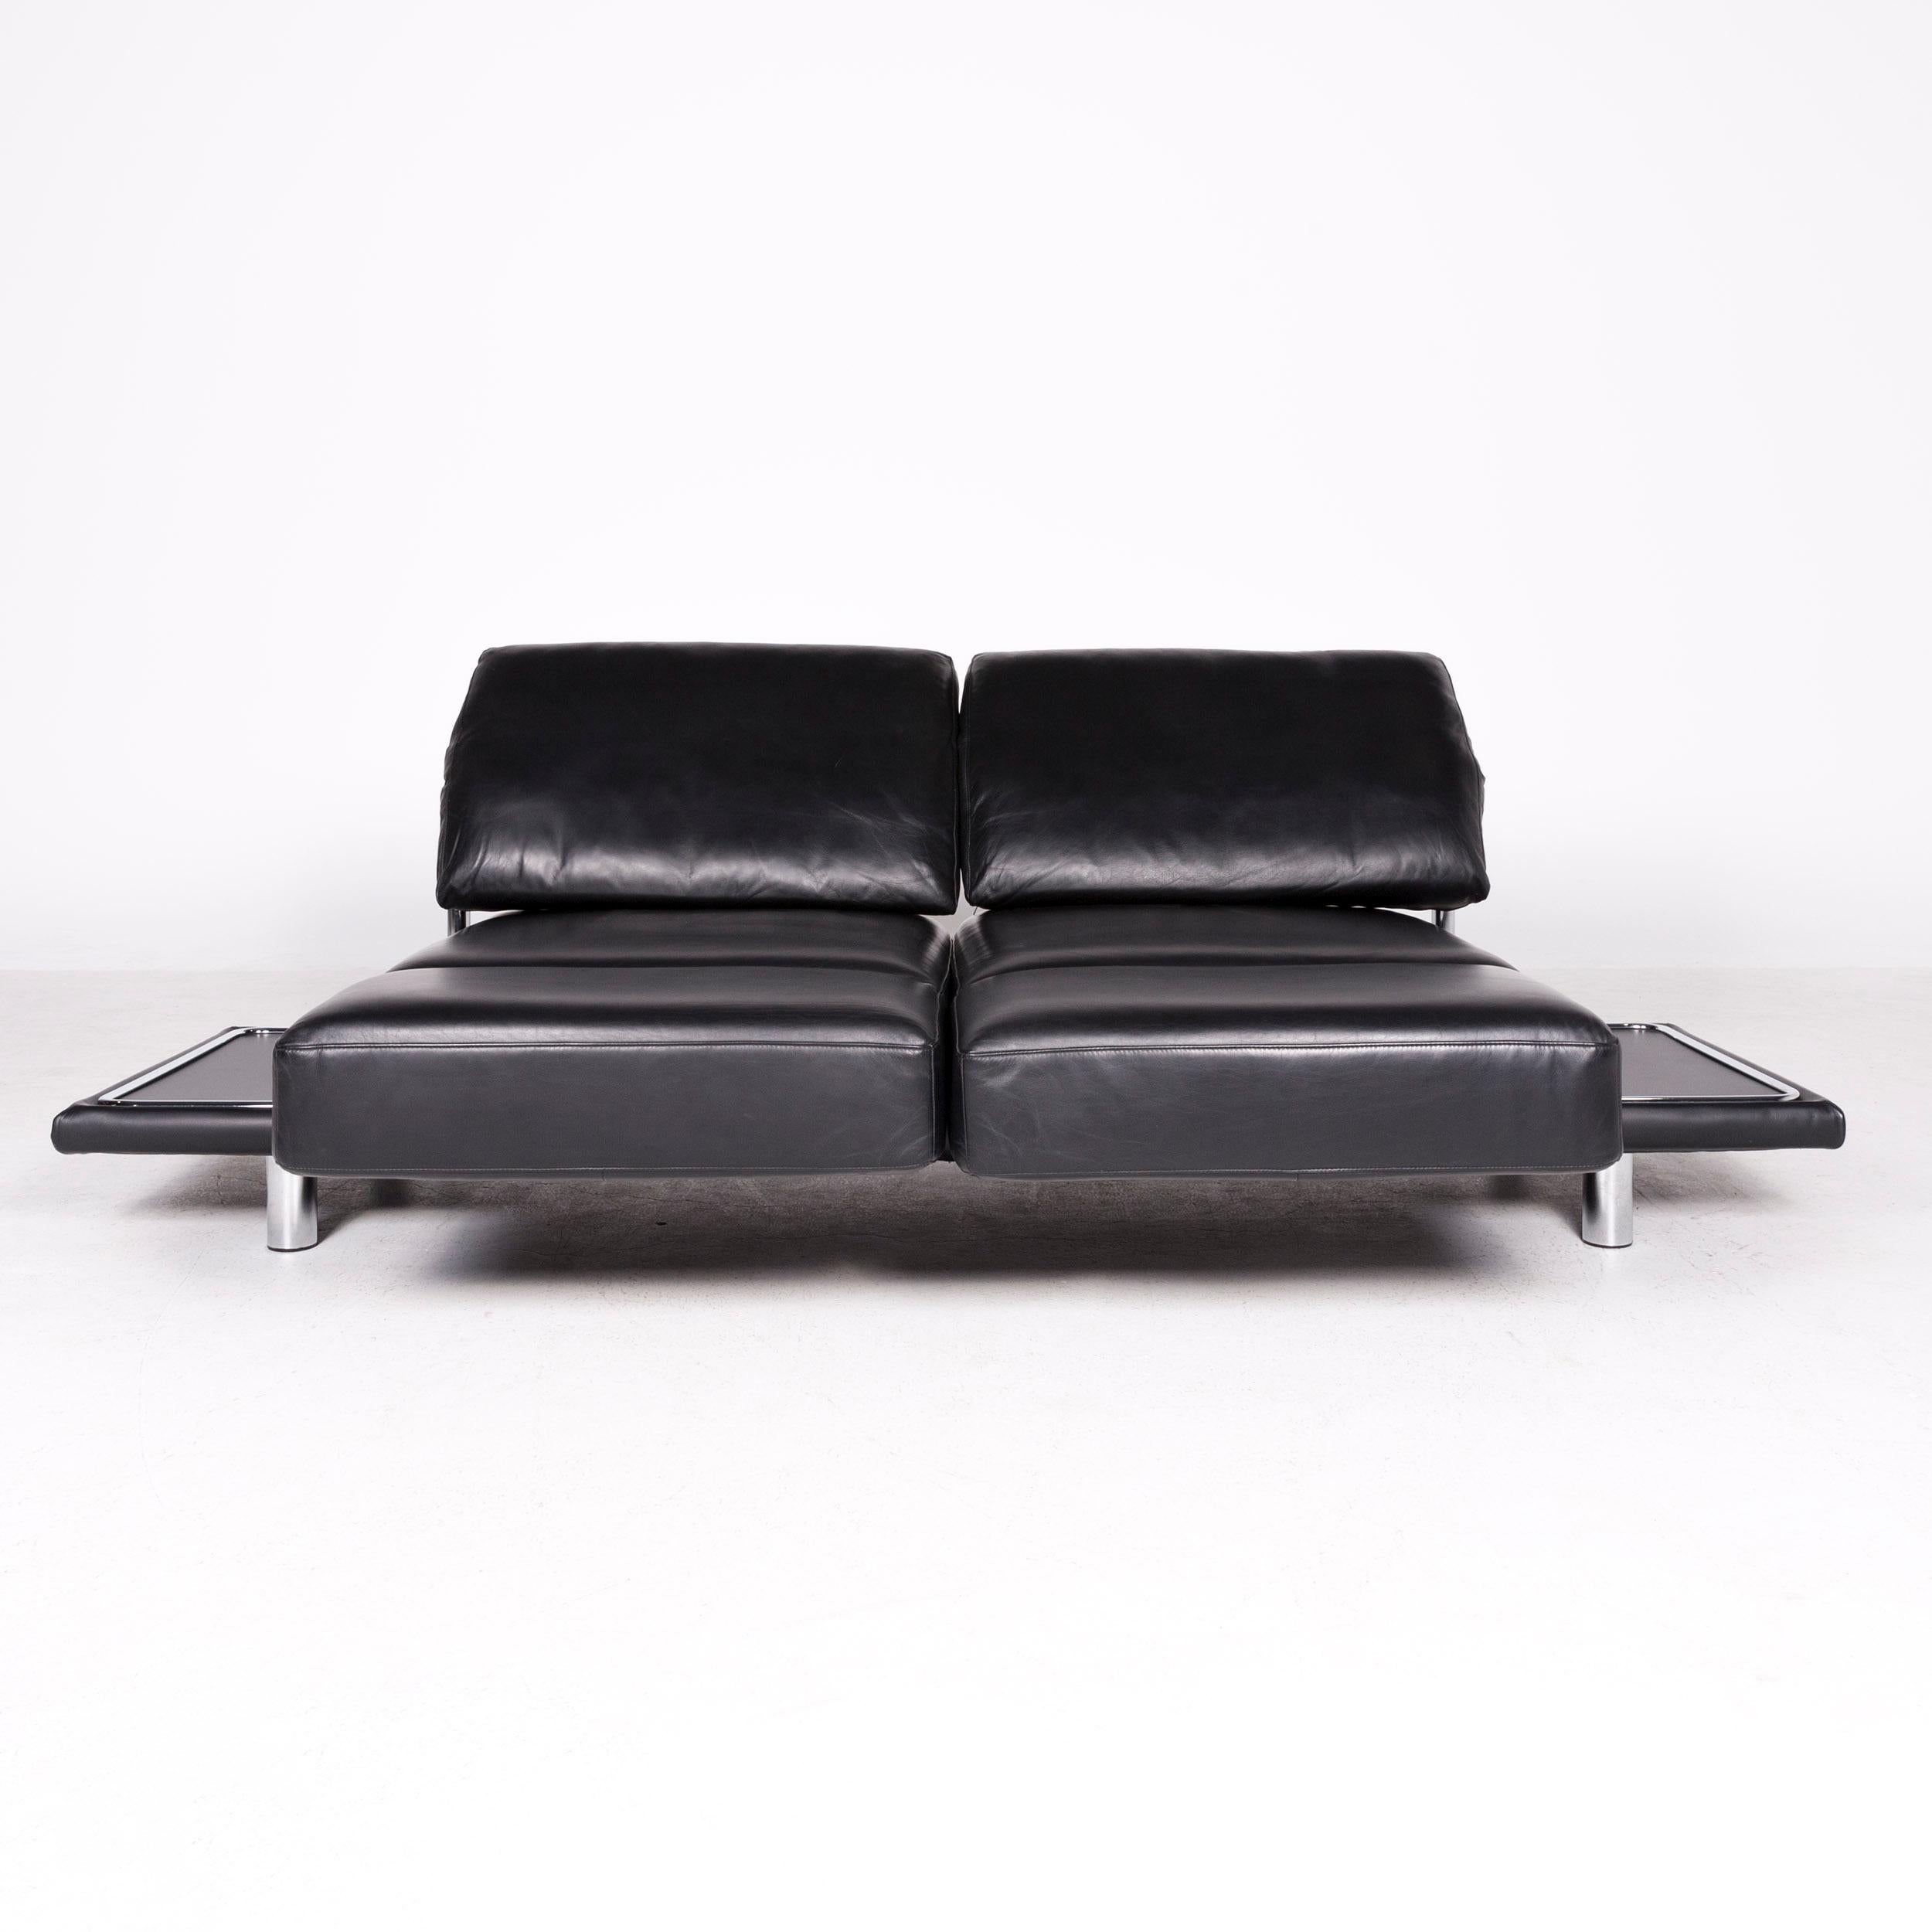 Rolf Benz 2400 Designer Leather Sofa Black Genuine Leather Three-Seat Couch In Good Condition For Sale In Cologne, DE